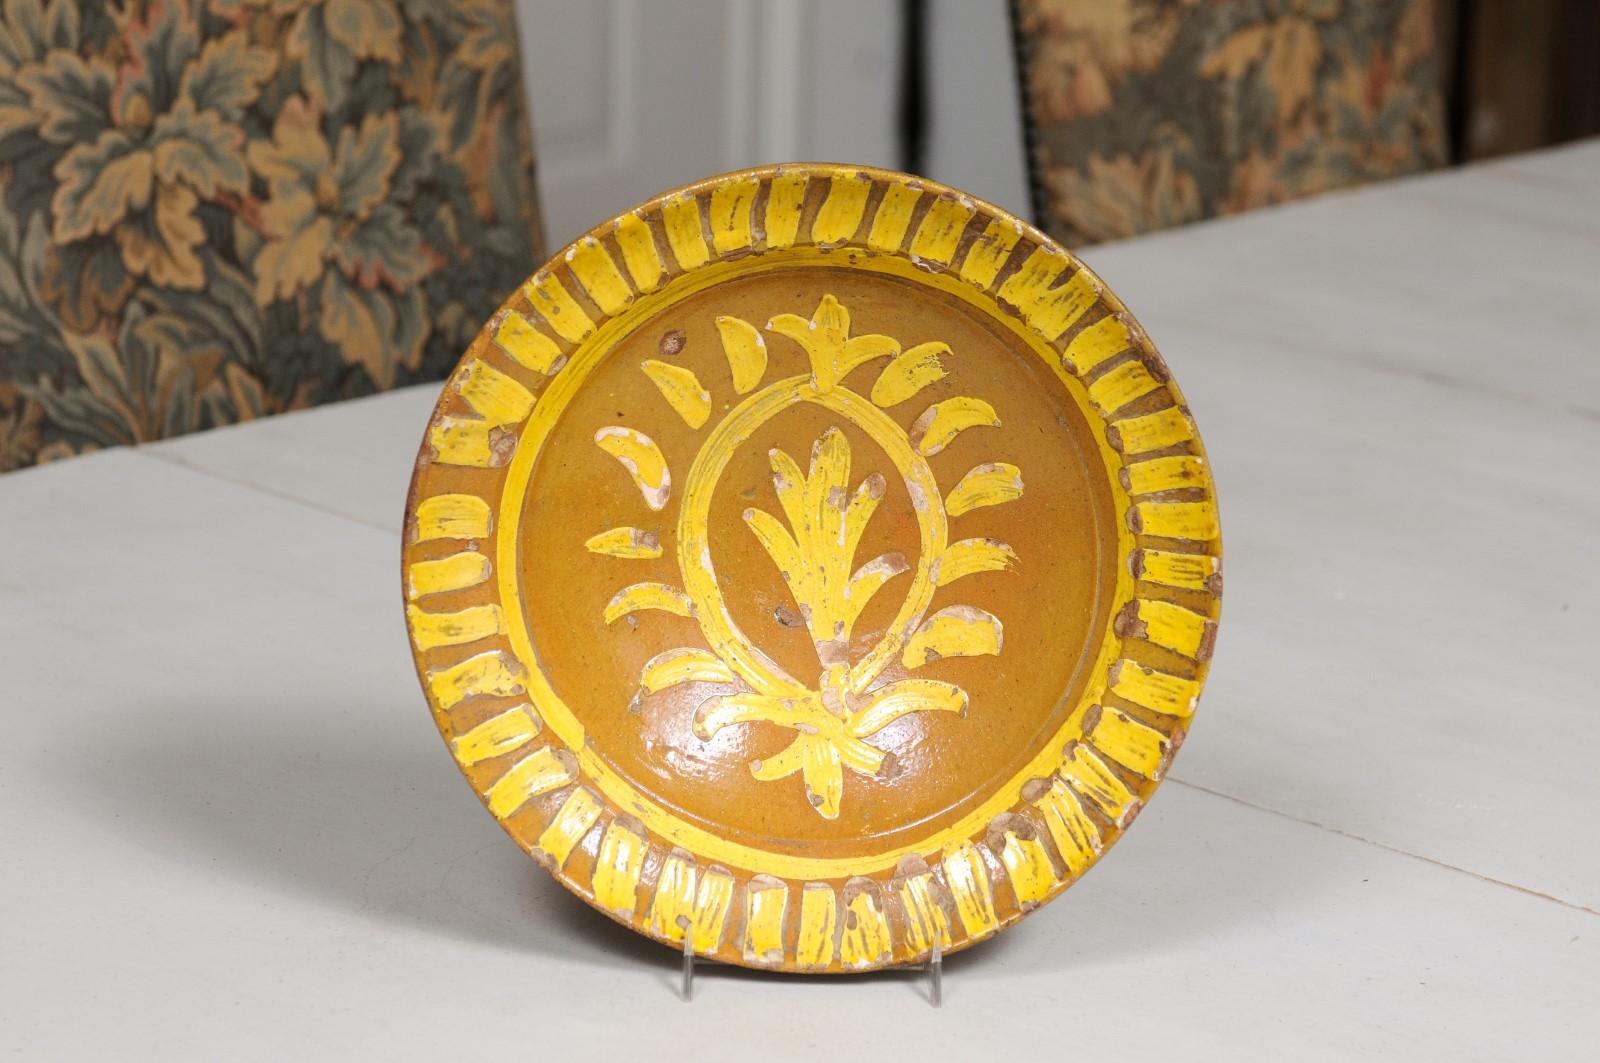 A French pottery soup plate from the 19th century, with yellow starburst motifs and stylized foliage. Created in France during the 19th century, this rustic plate features a brown ground contrasted by a bright yellow glazed décor, showcasing